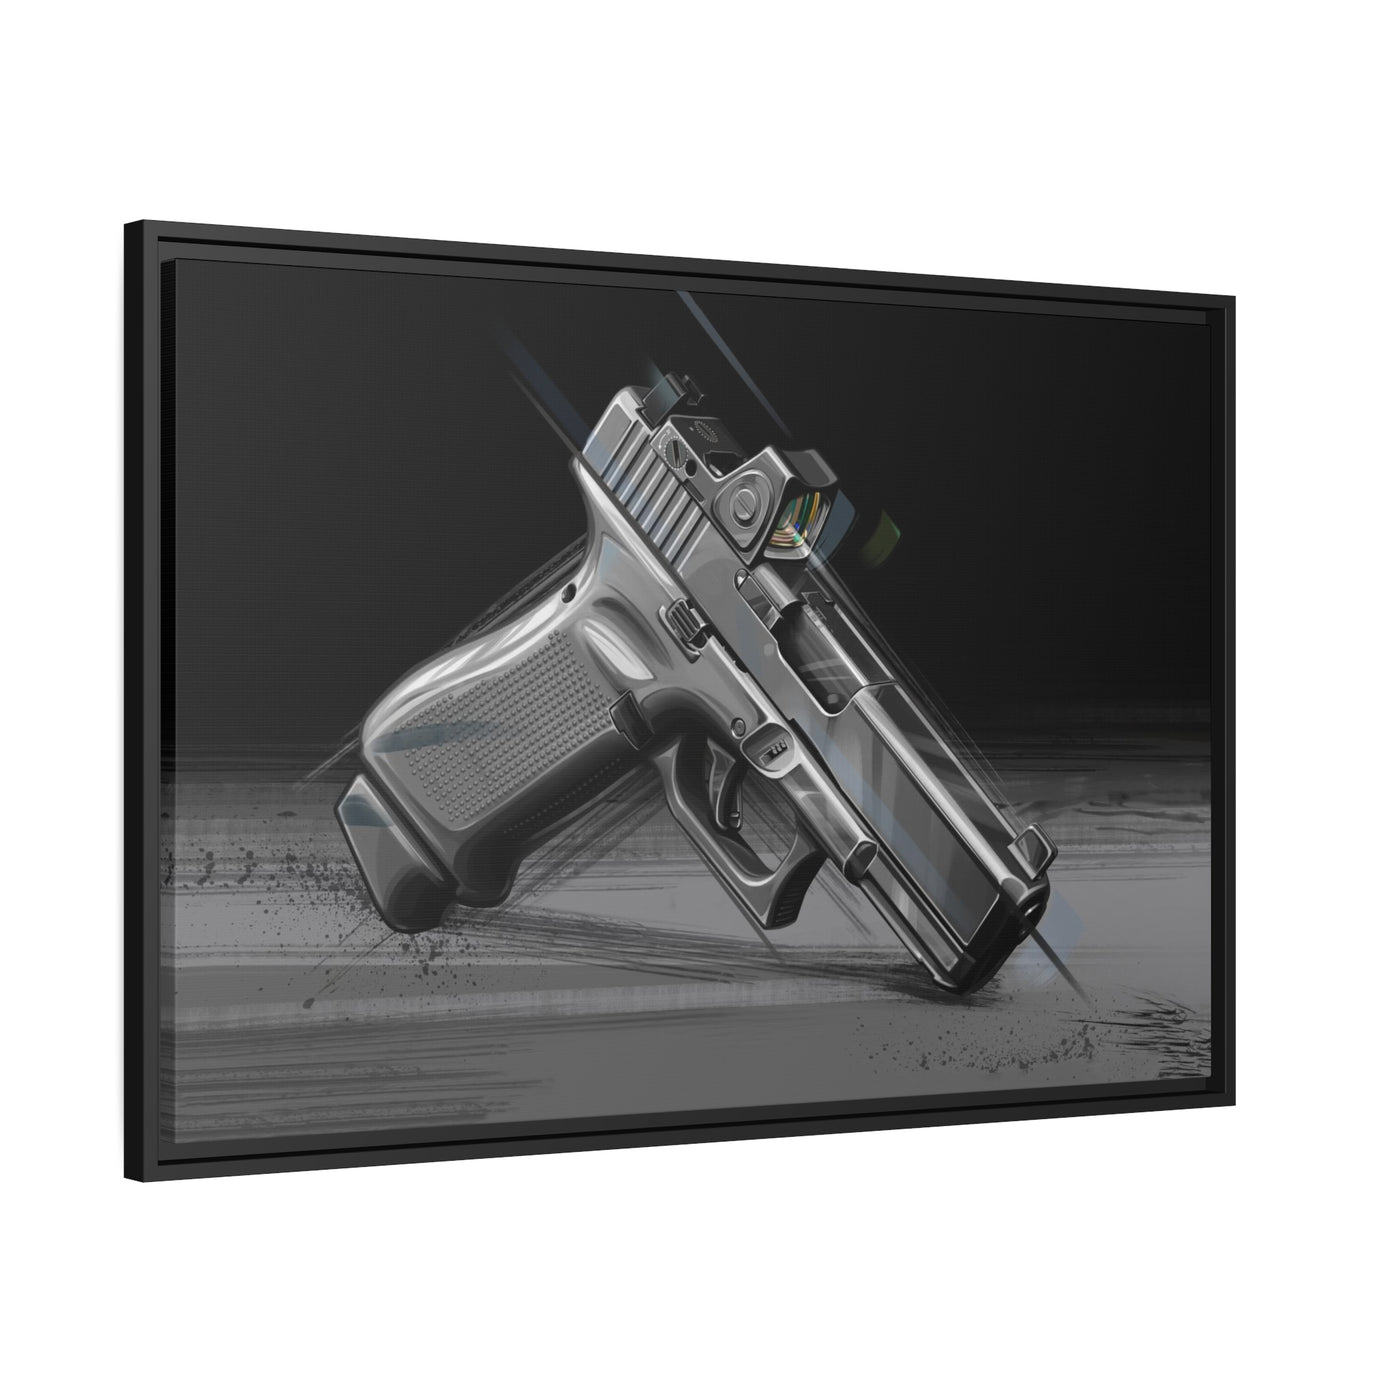 The Last Resort - OG Grey Poly Pistol Painting - Black Framed Wrapped Canvas - Value Collection